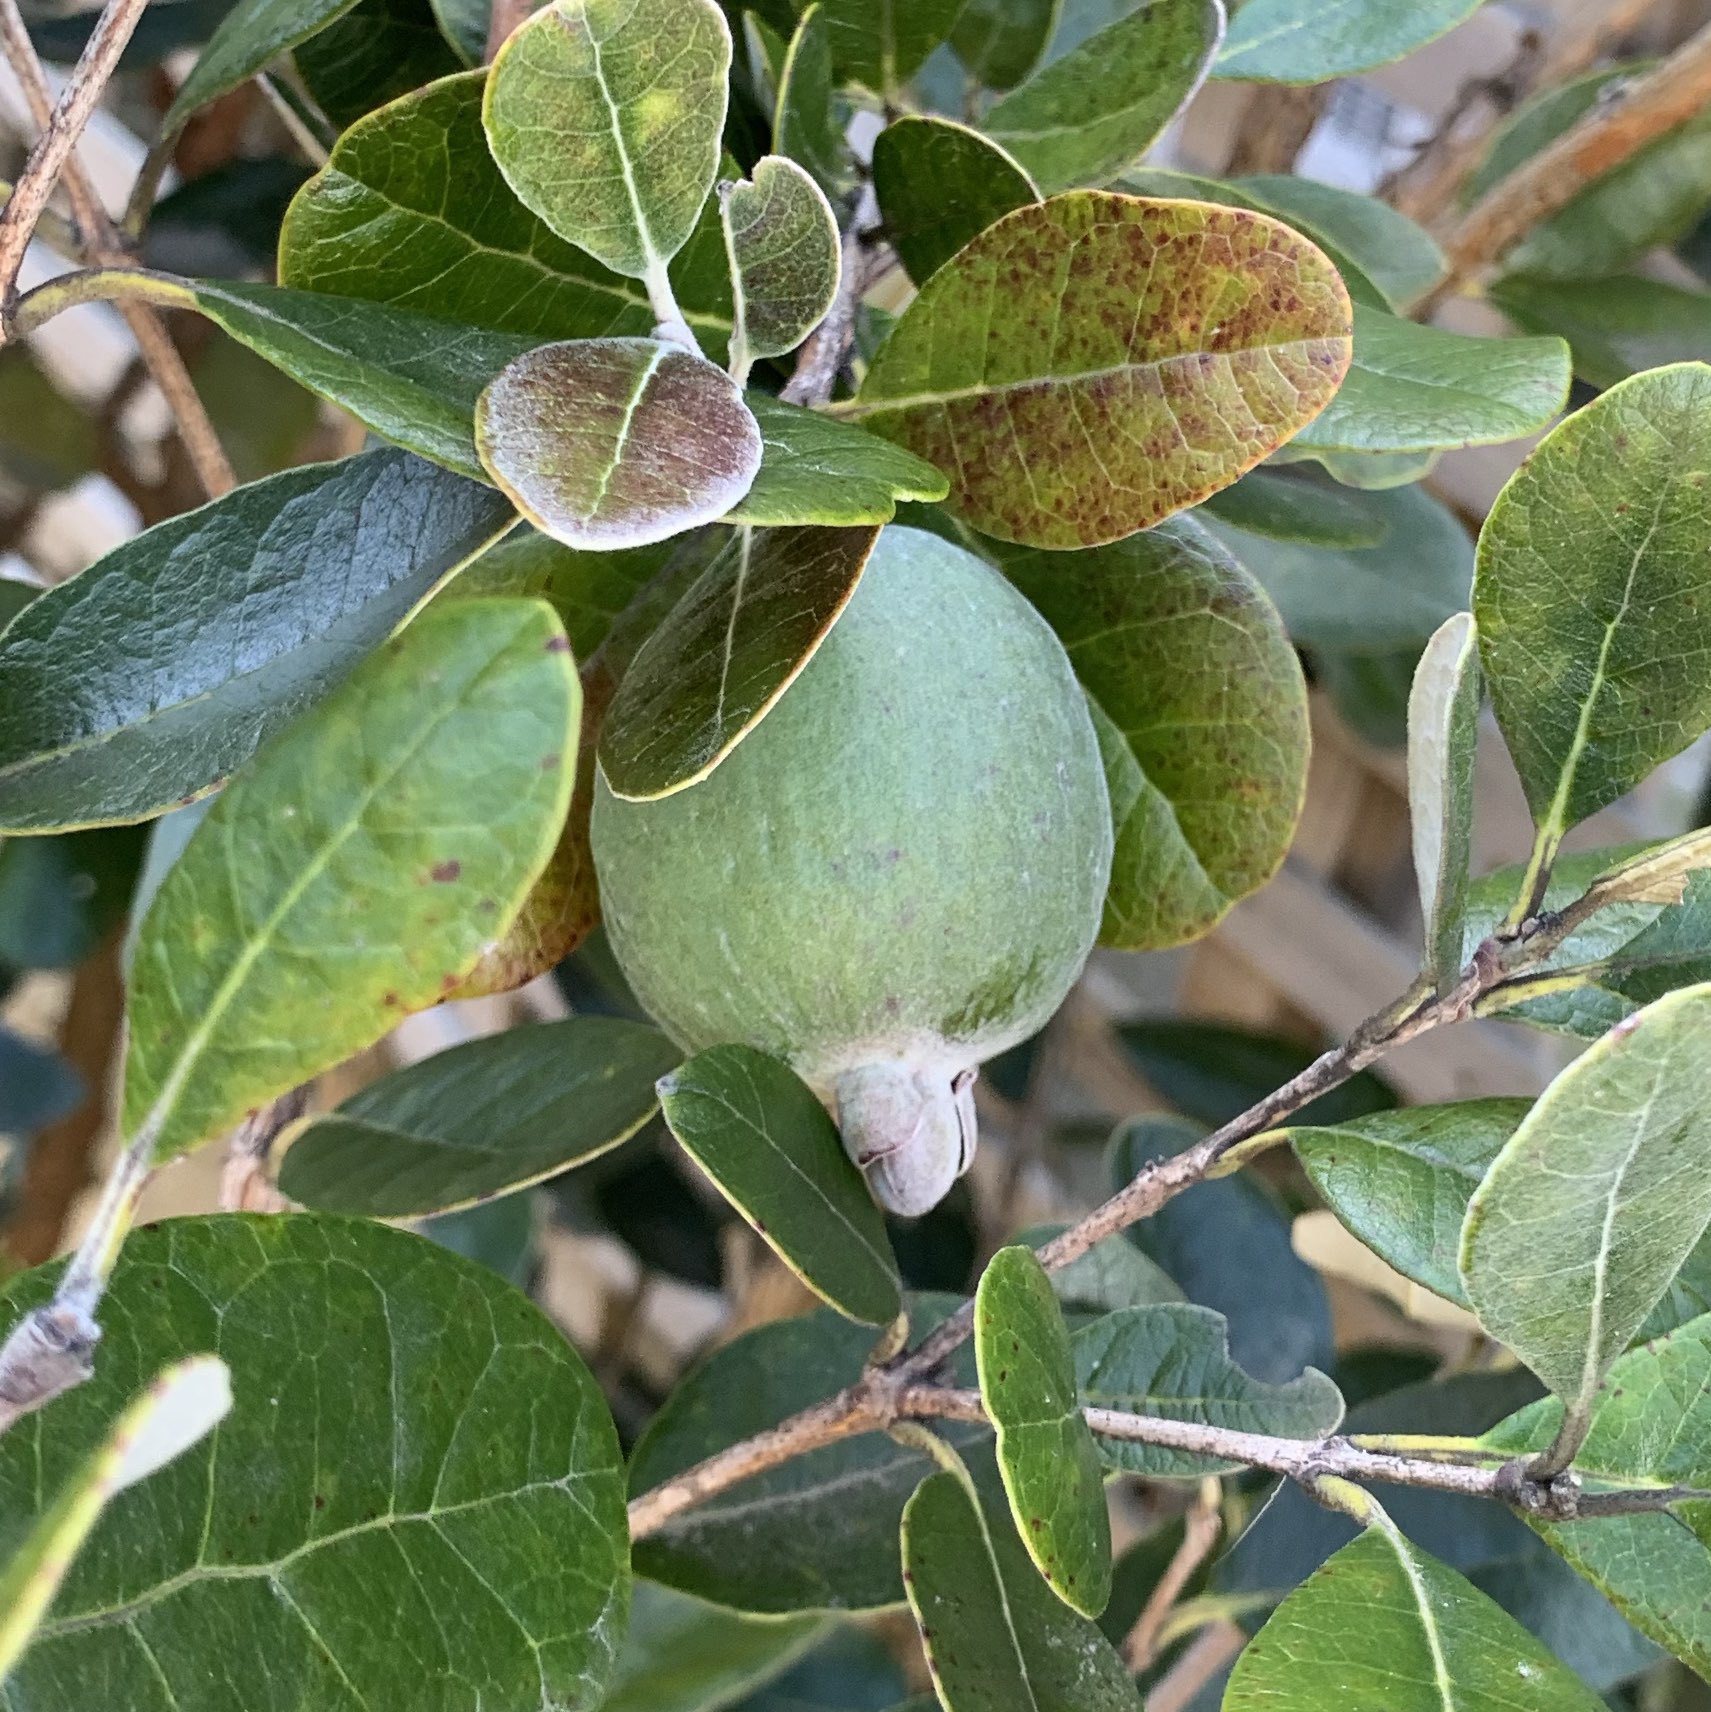 A feijoa, or pineapple guava, on the tree. 